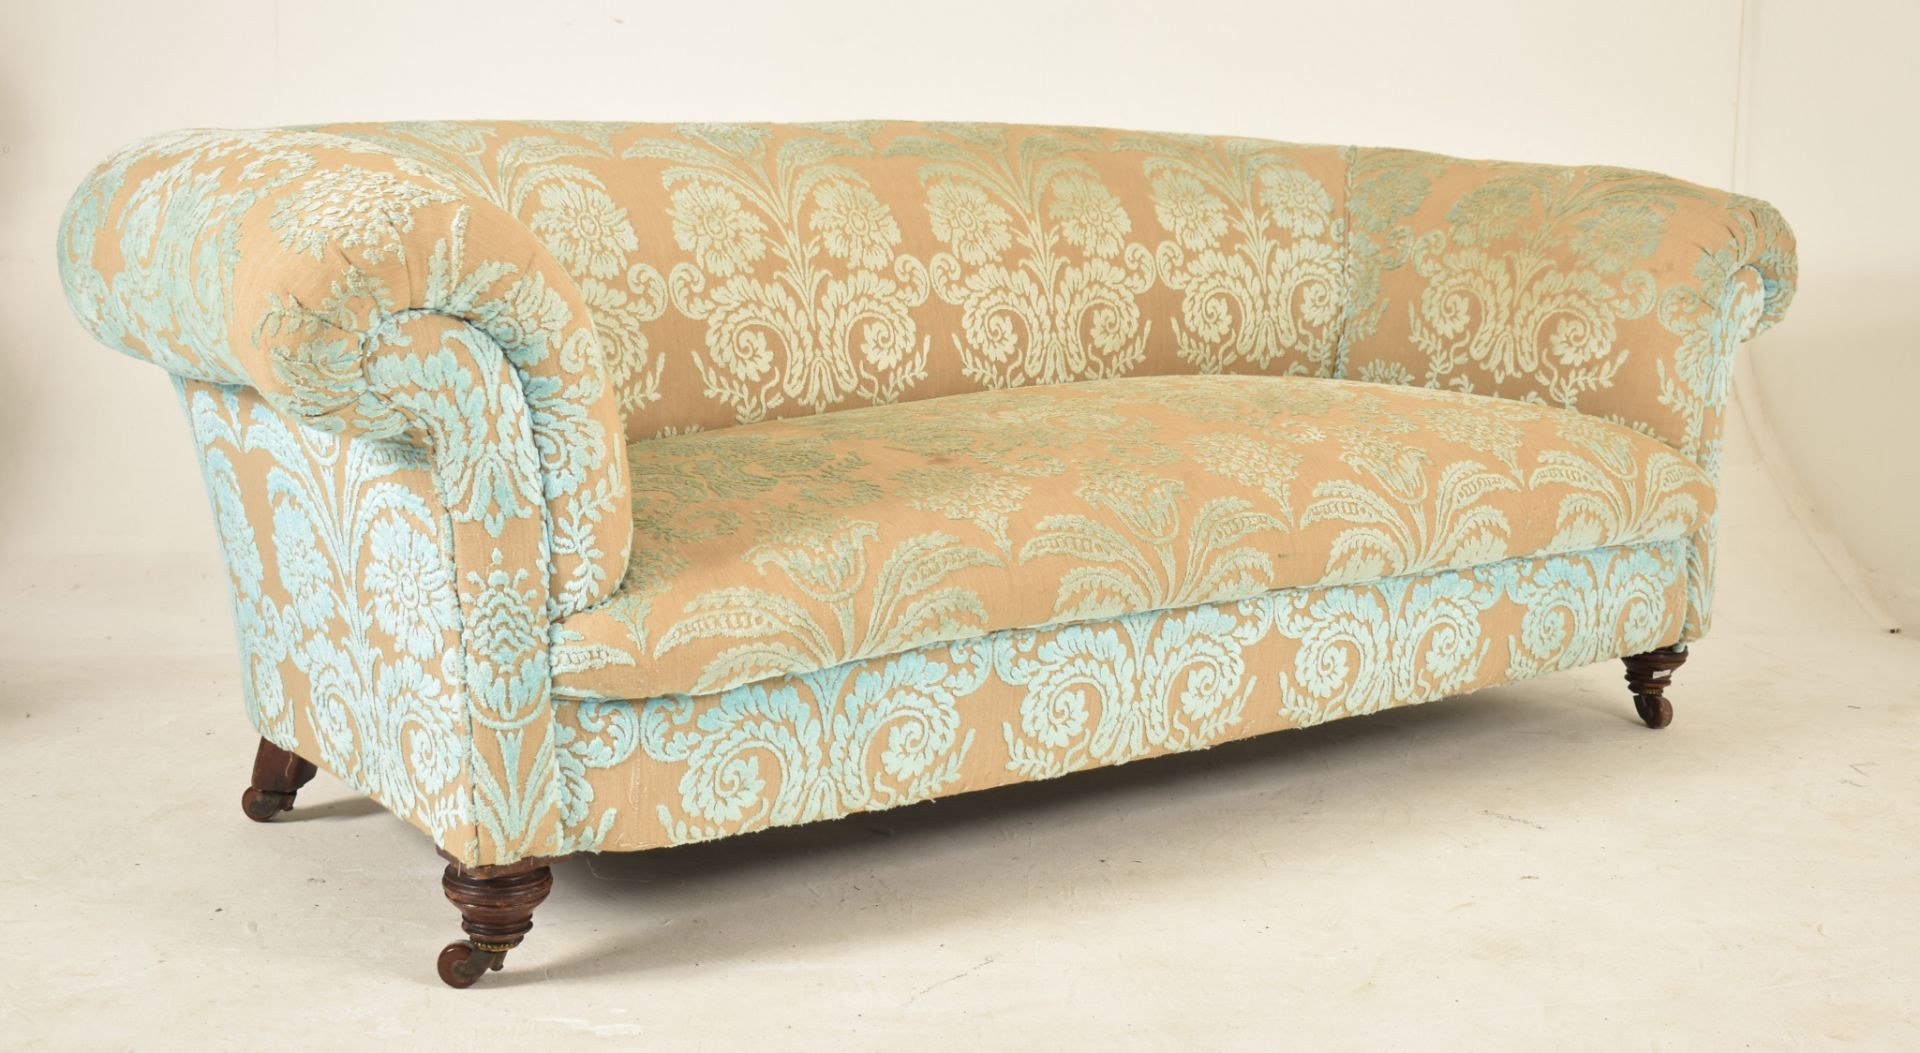 TWO 19TH CENTURY VICTORIAN LARGE CHESTERFIELD SOFAS - Image 6 of 10